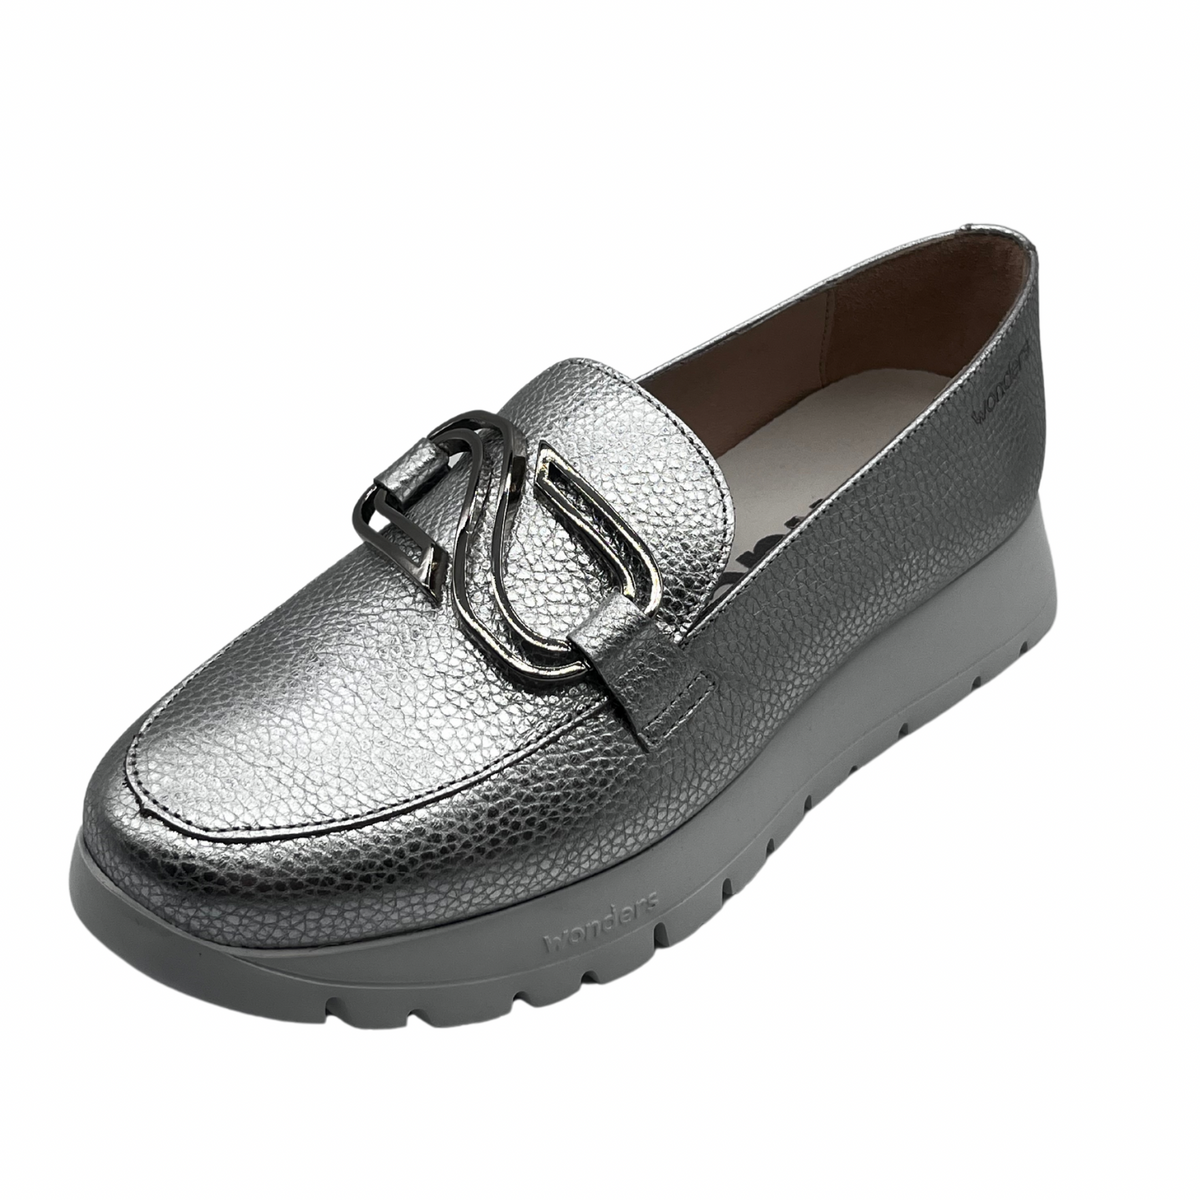 Wonders Silver Metallic Leather Loafers